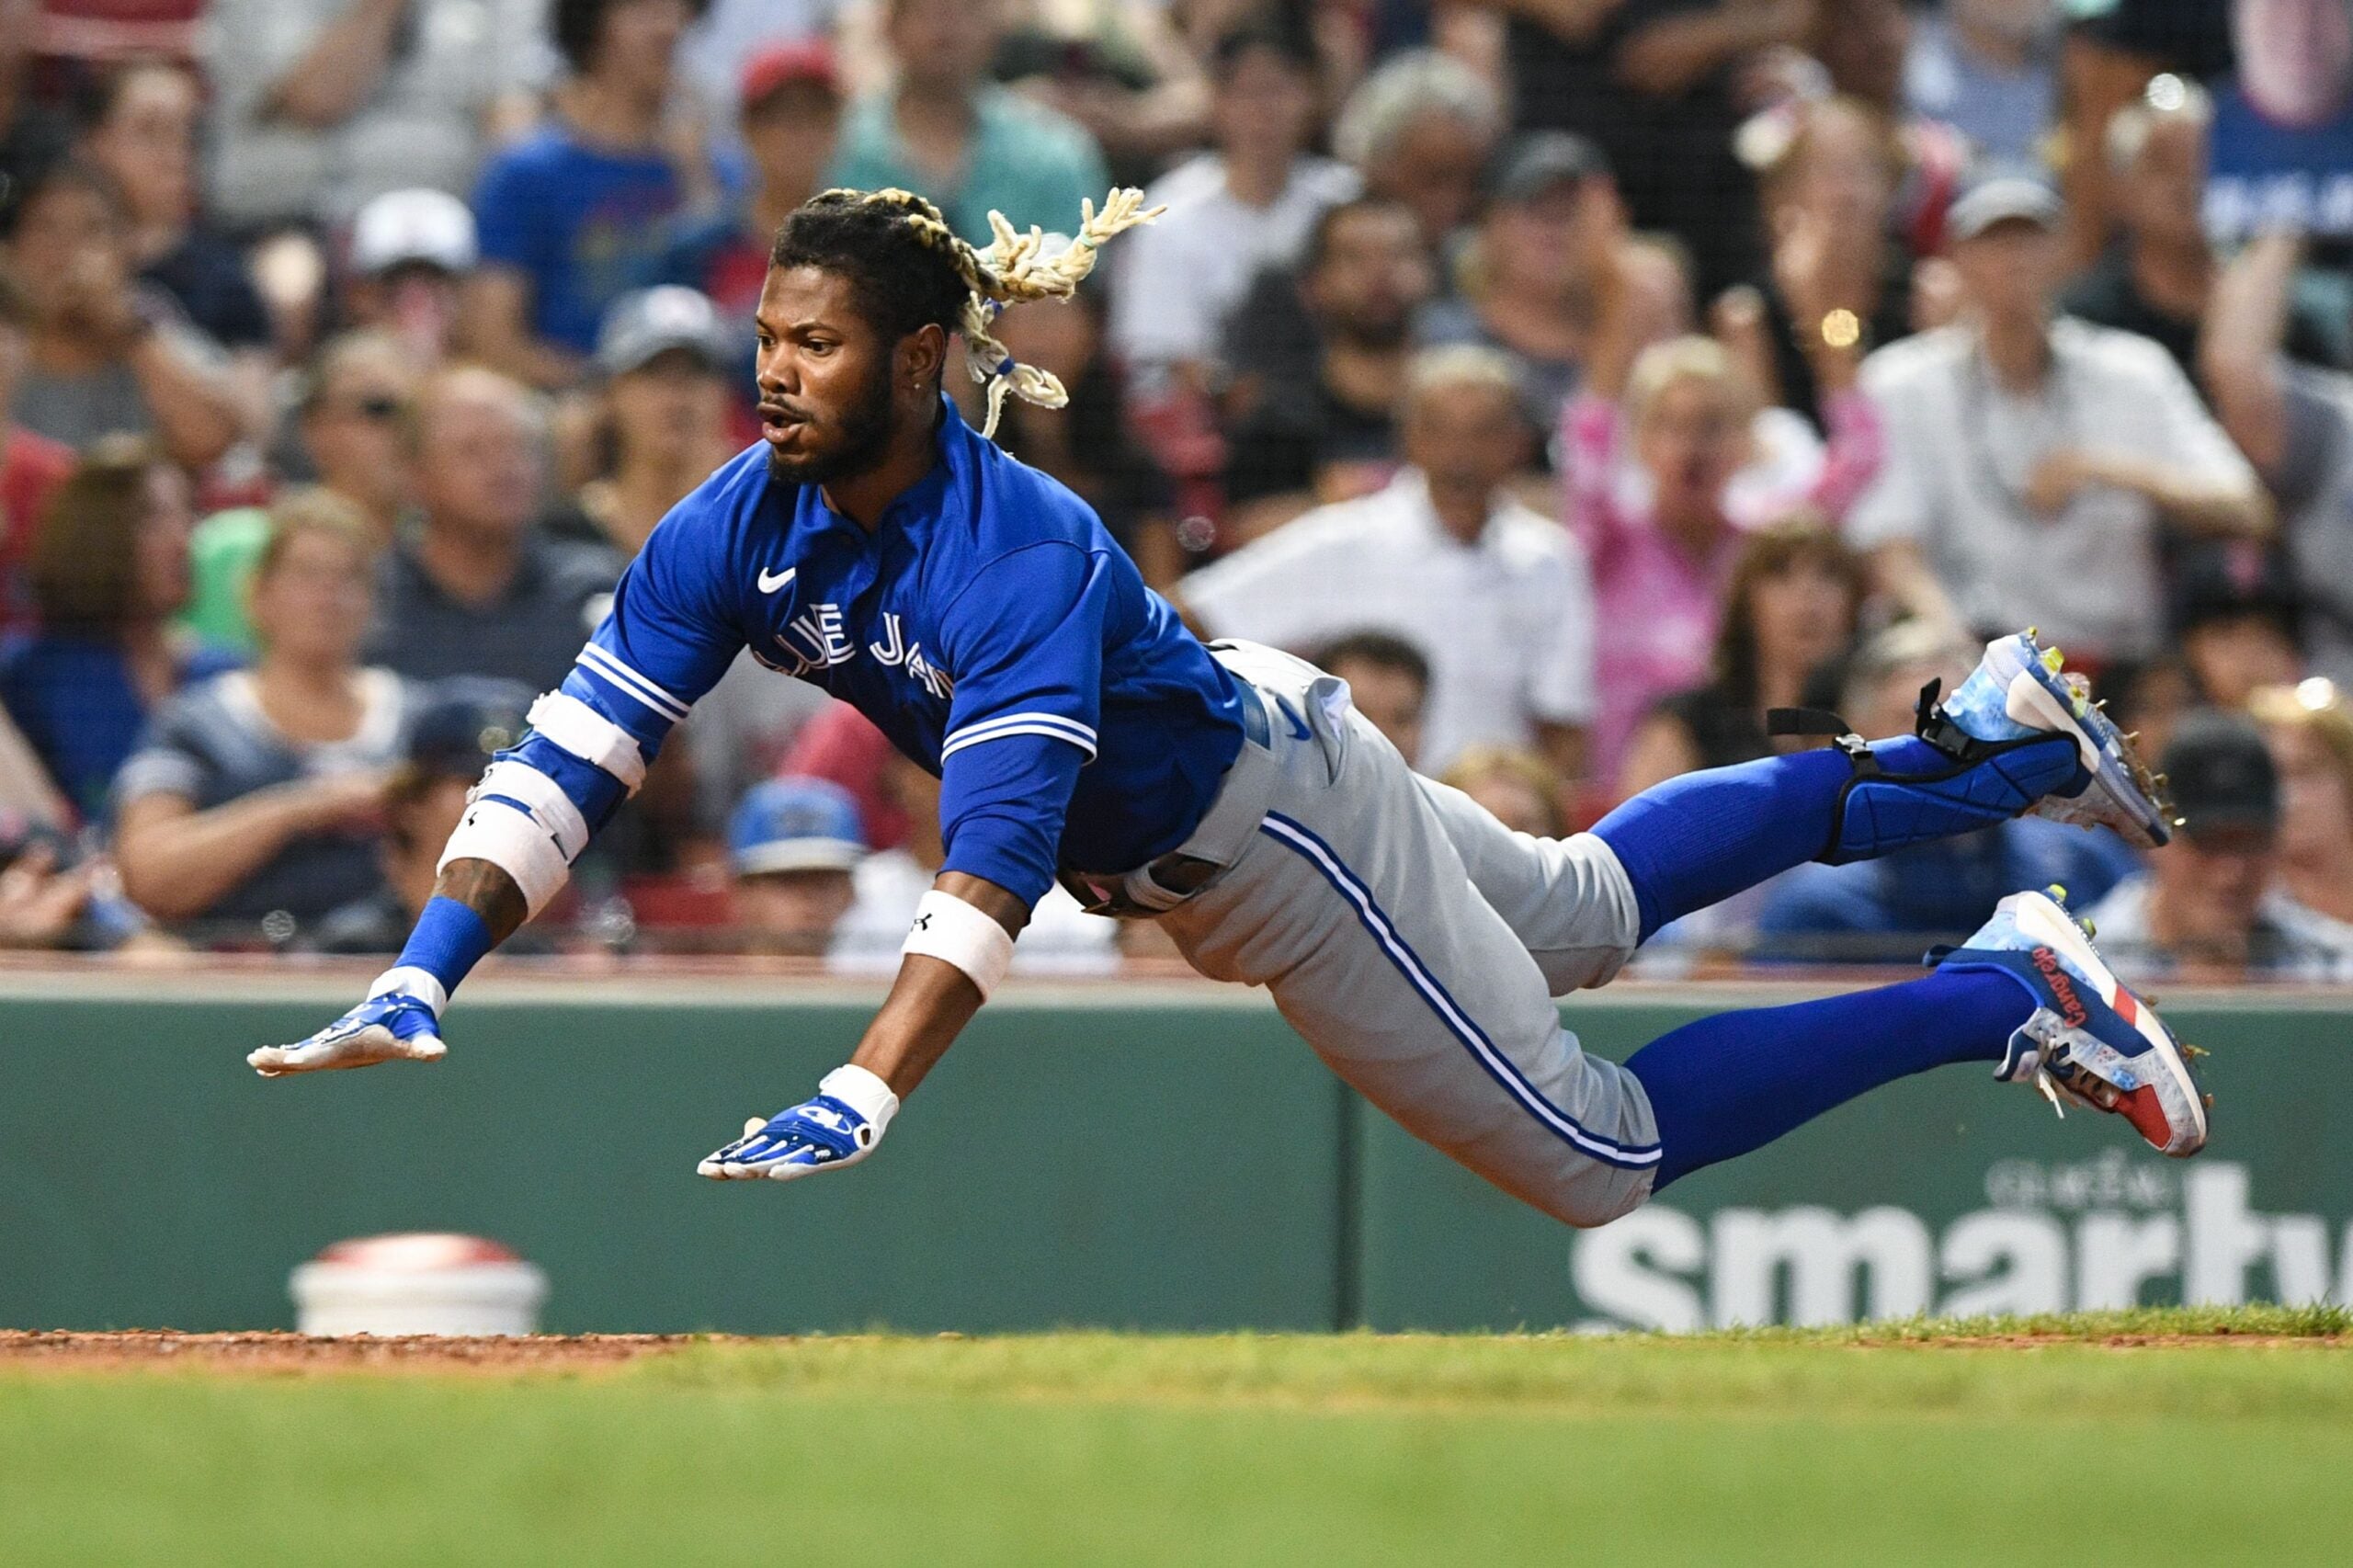 4 takeaways as Red Sox allow franchise record 28 runs in loss to Jays